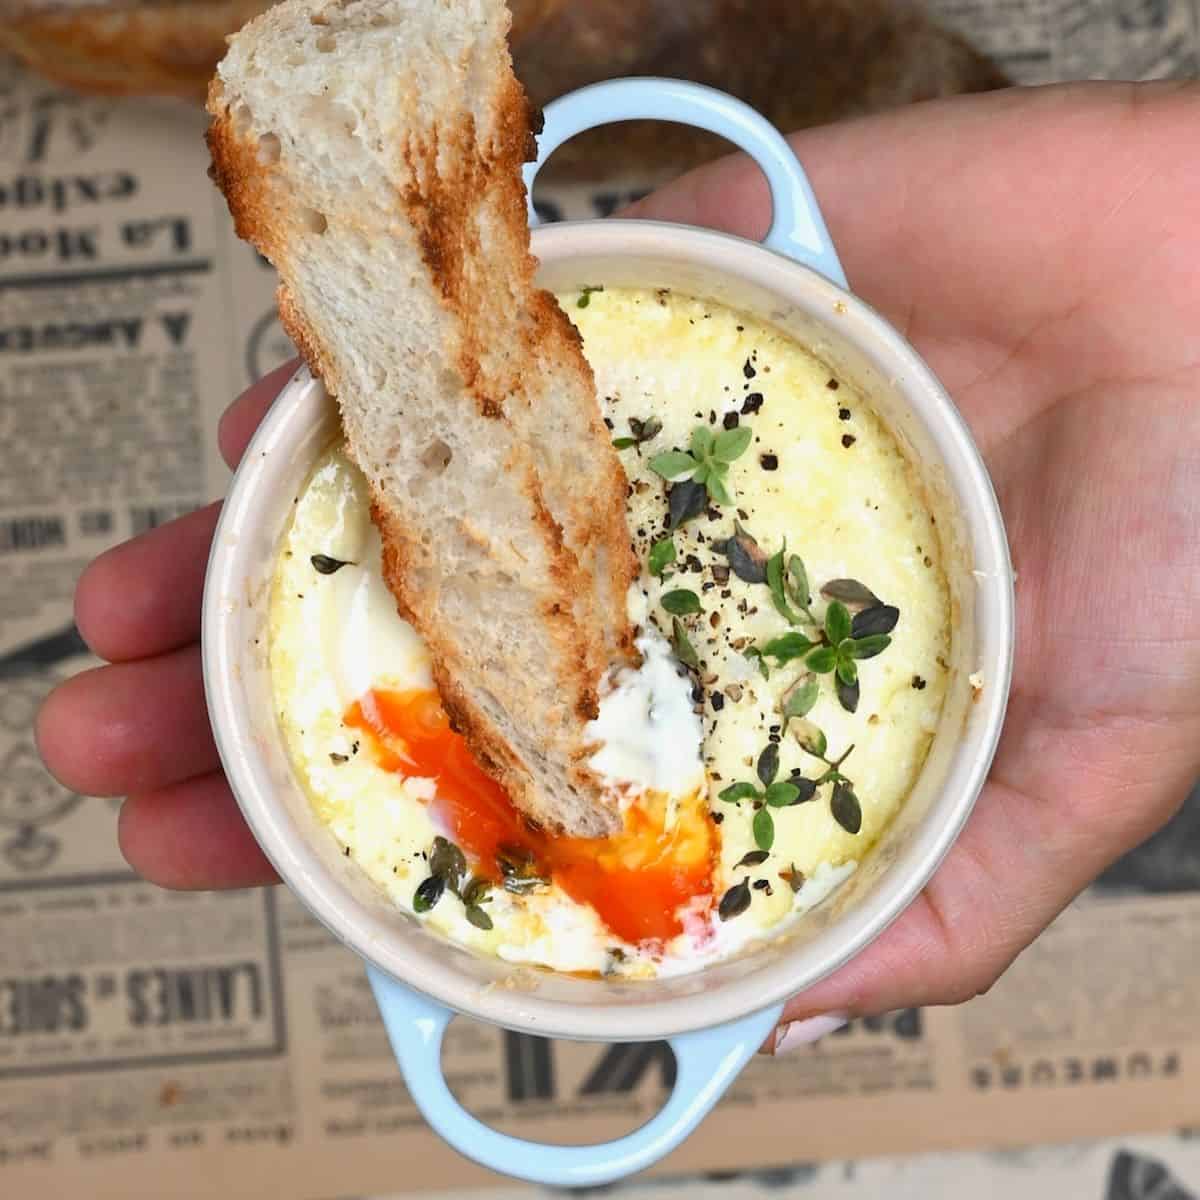 French baked eggs and bread